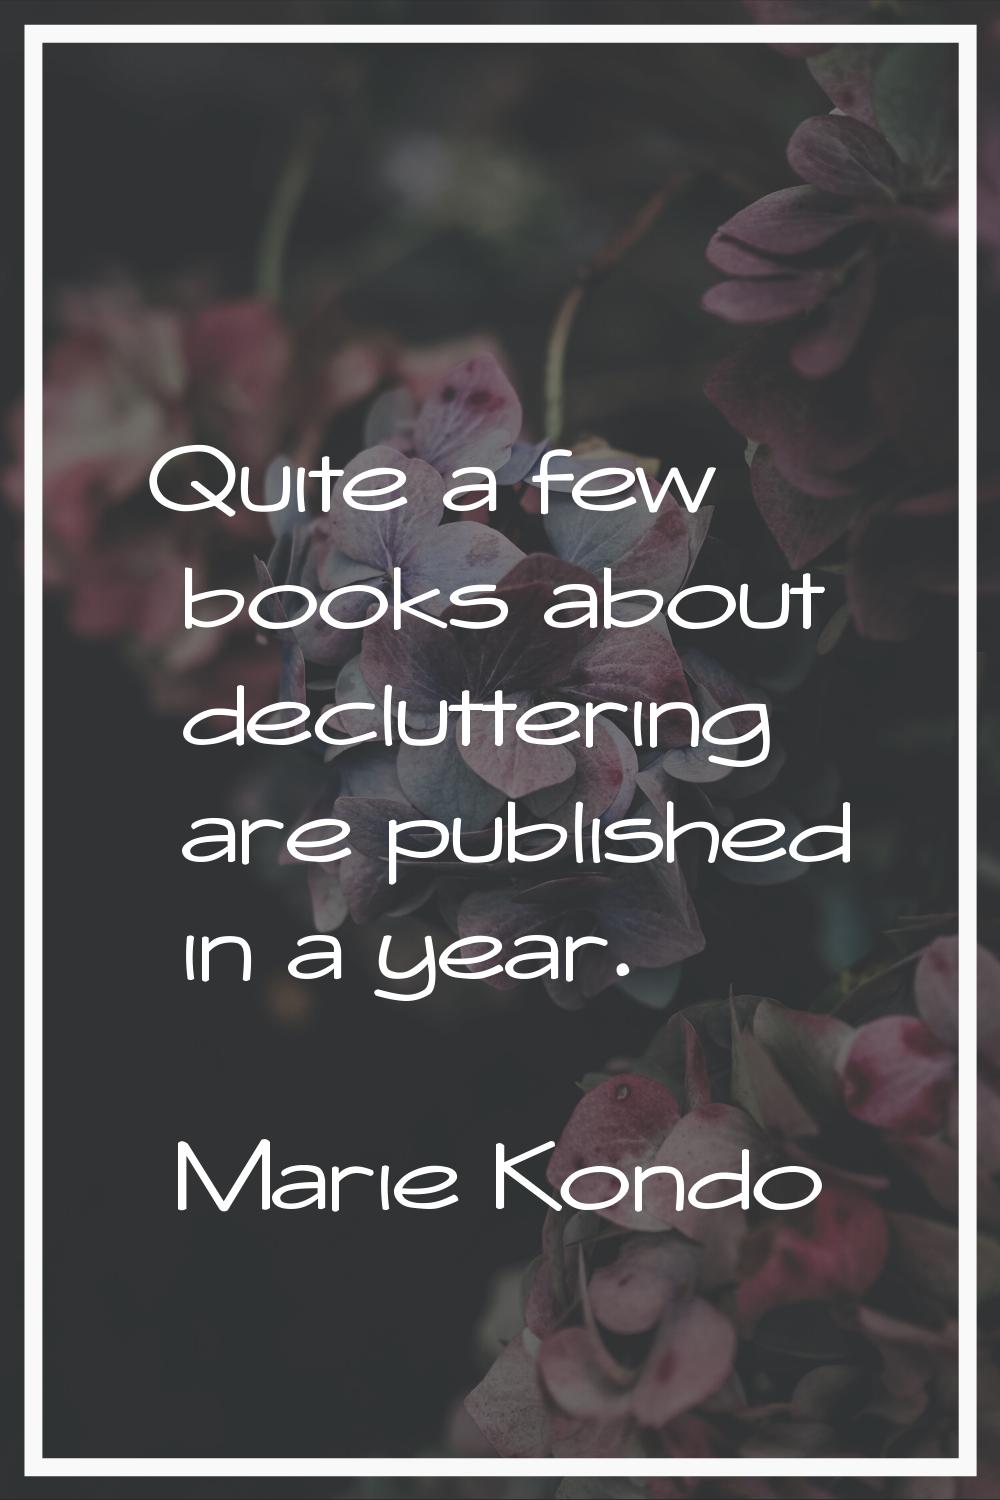 Quite a few books about decluttering are published in a year.